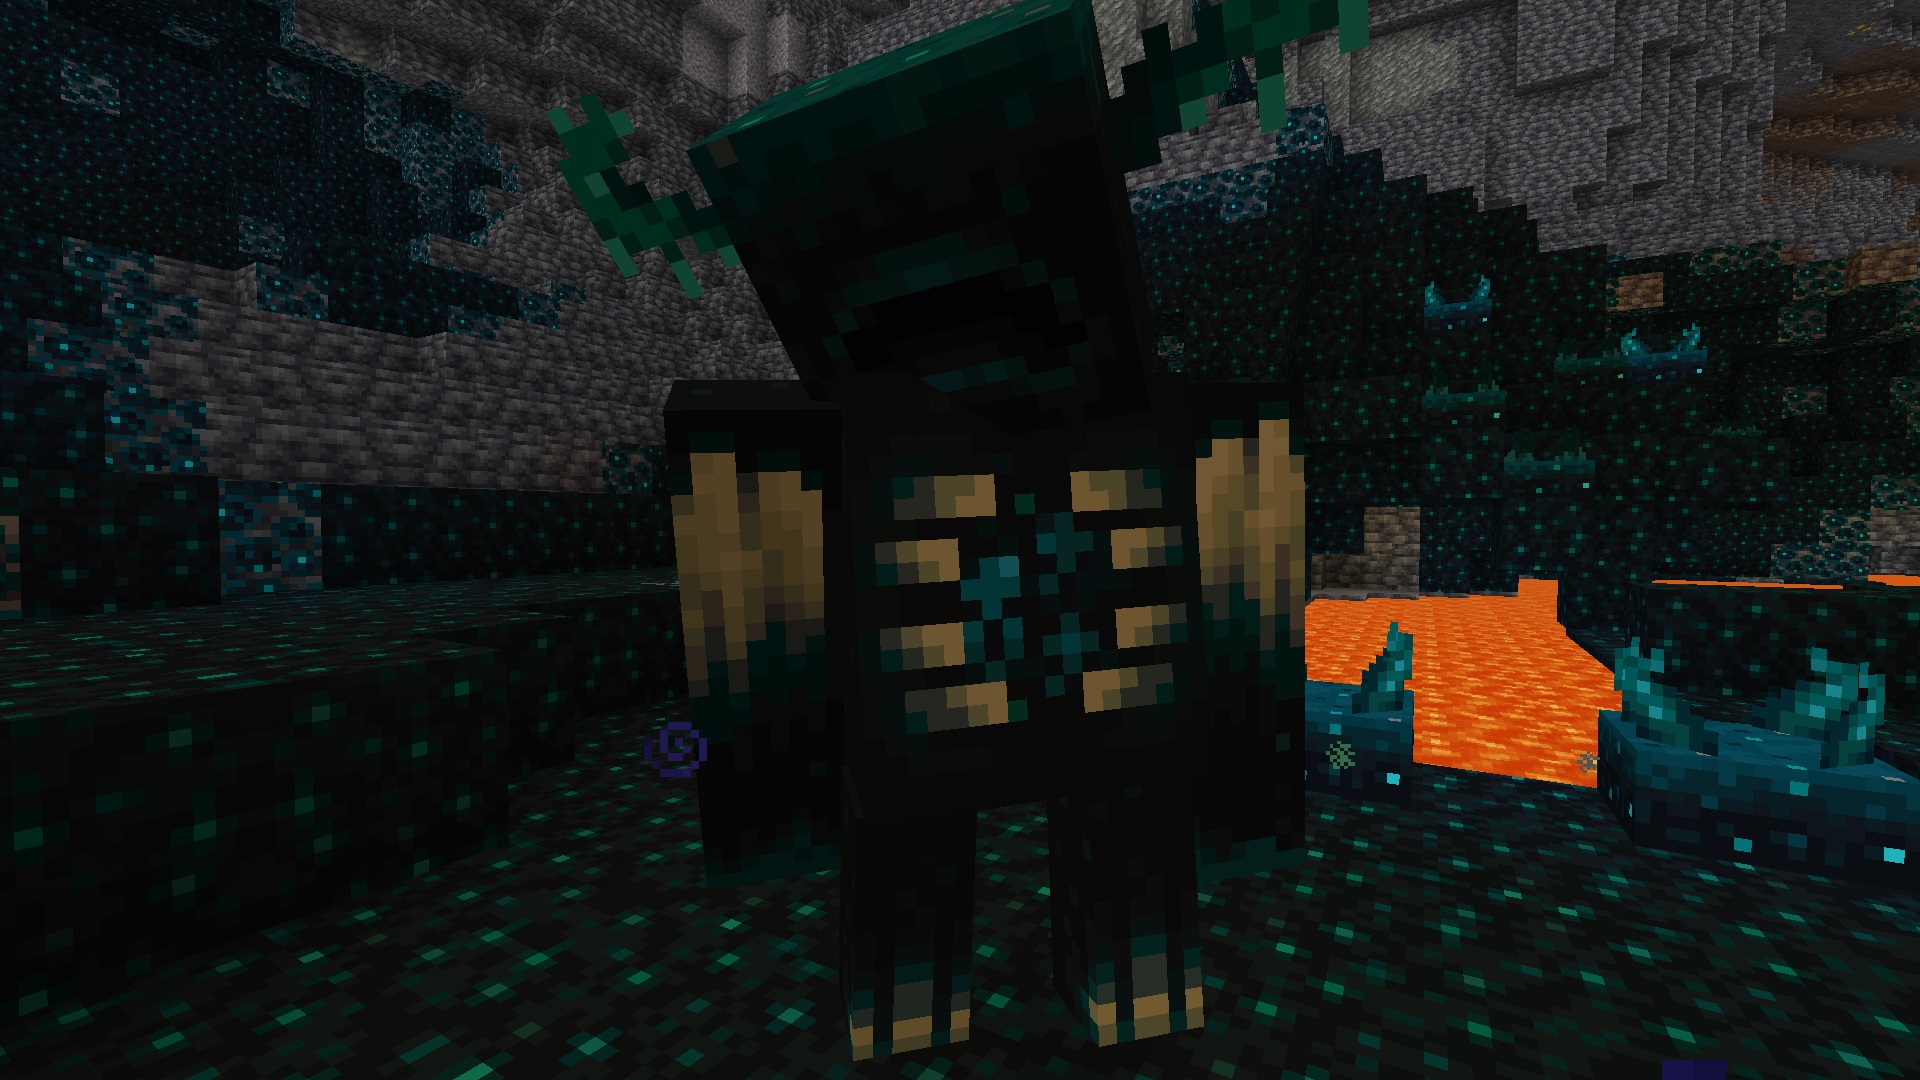 Minecraft - A Warden mob with its glowing teal heart, large body, and antennae, stands in a Deep Dark biome surrounded by lava